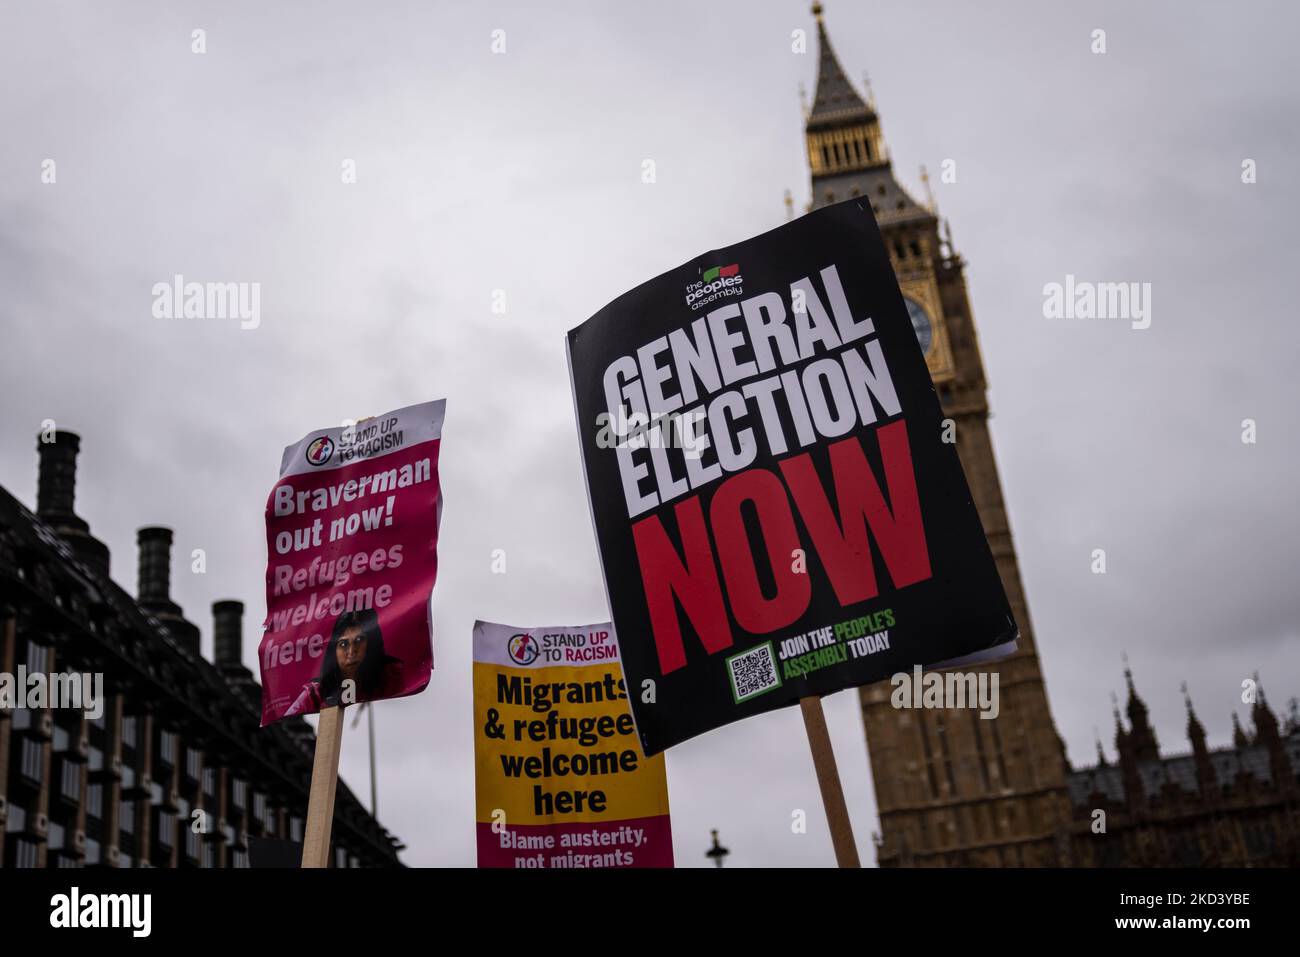 Westminster, London, UK. 5th Nov, 2022. Protesters are demonstrating in London asking for a general election to take place in the UK following the repeated change of Conservative party leadership and therefore Prime Ministers. They regard the Prime Minister as being unelected. Other themes include the cost of living crisis, low wages, fuel poverty and nationalisation Stock Photo